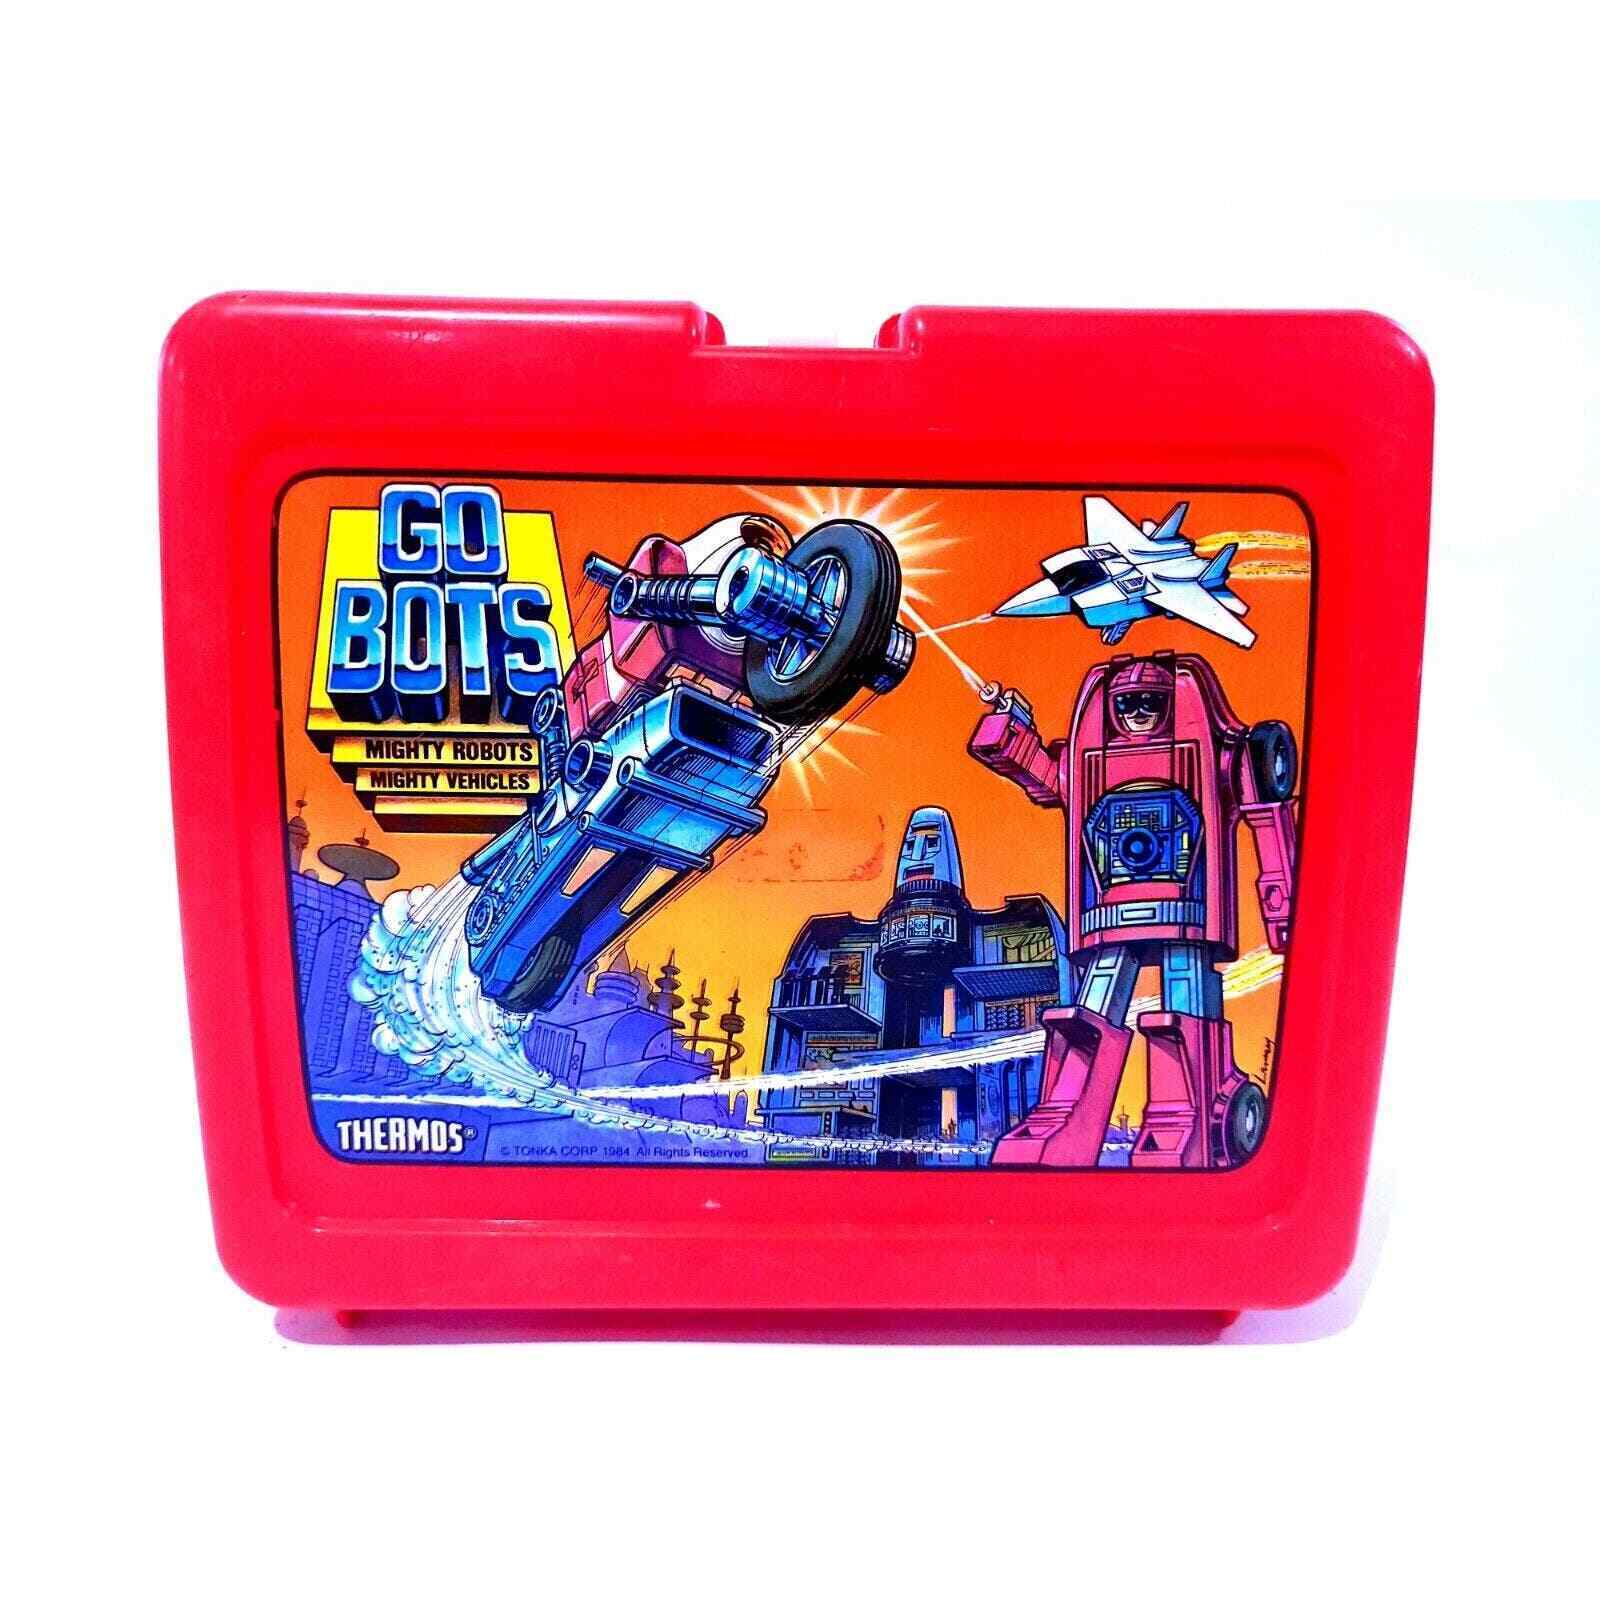 Vintage Tonka GOBOTS 1984 Lunch Box Thermos Brand Red Plastic